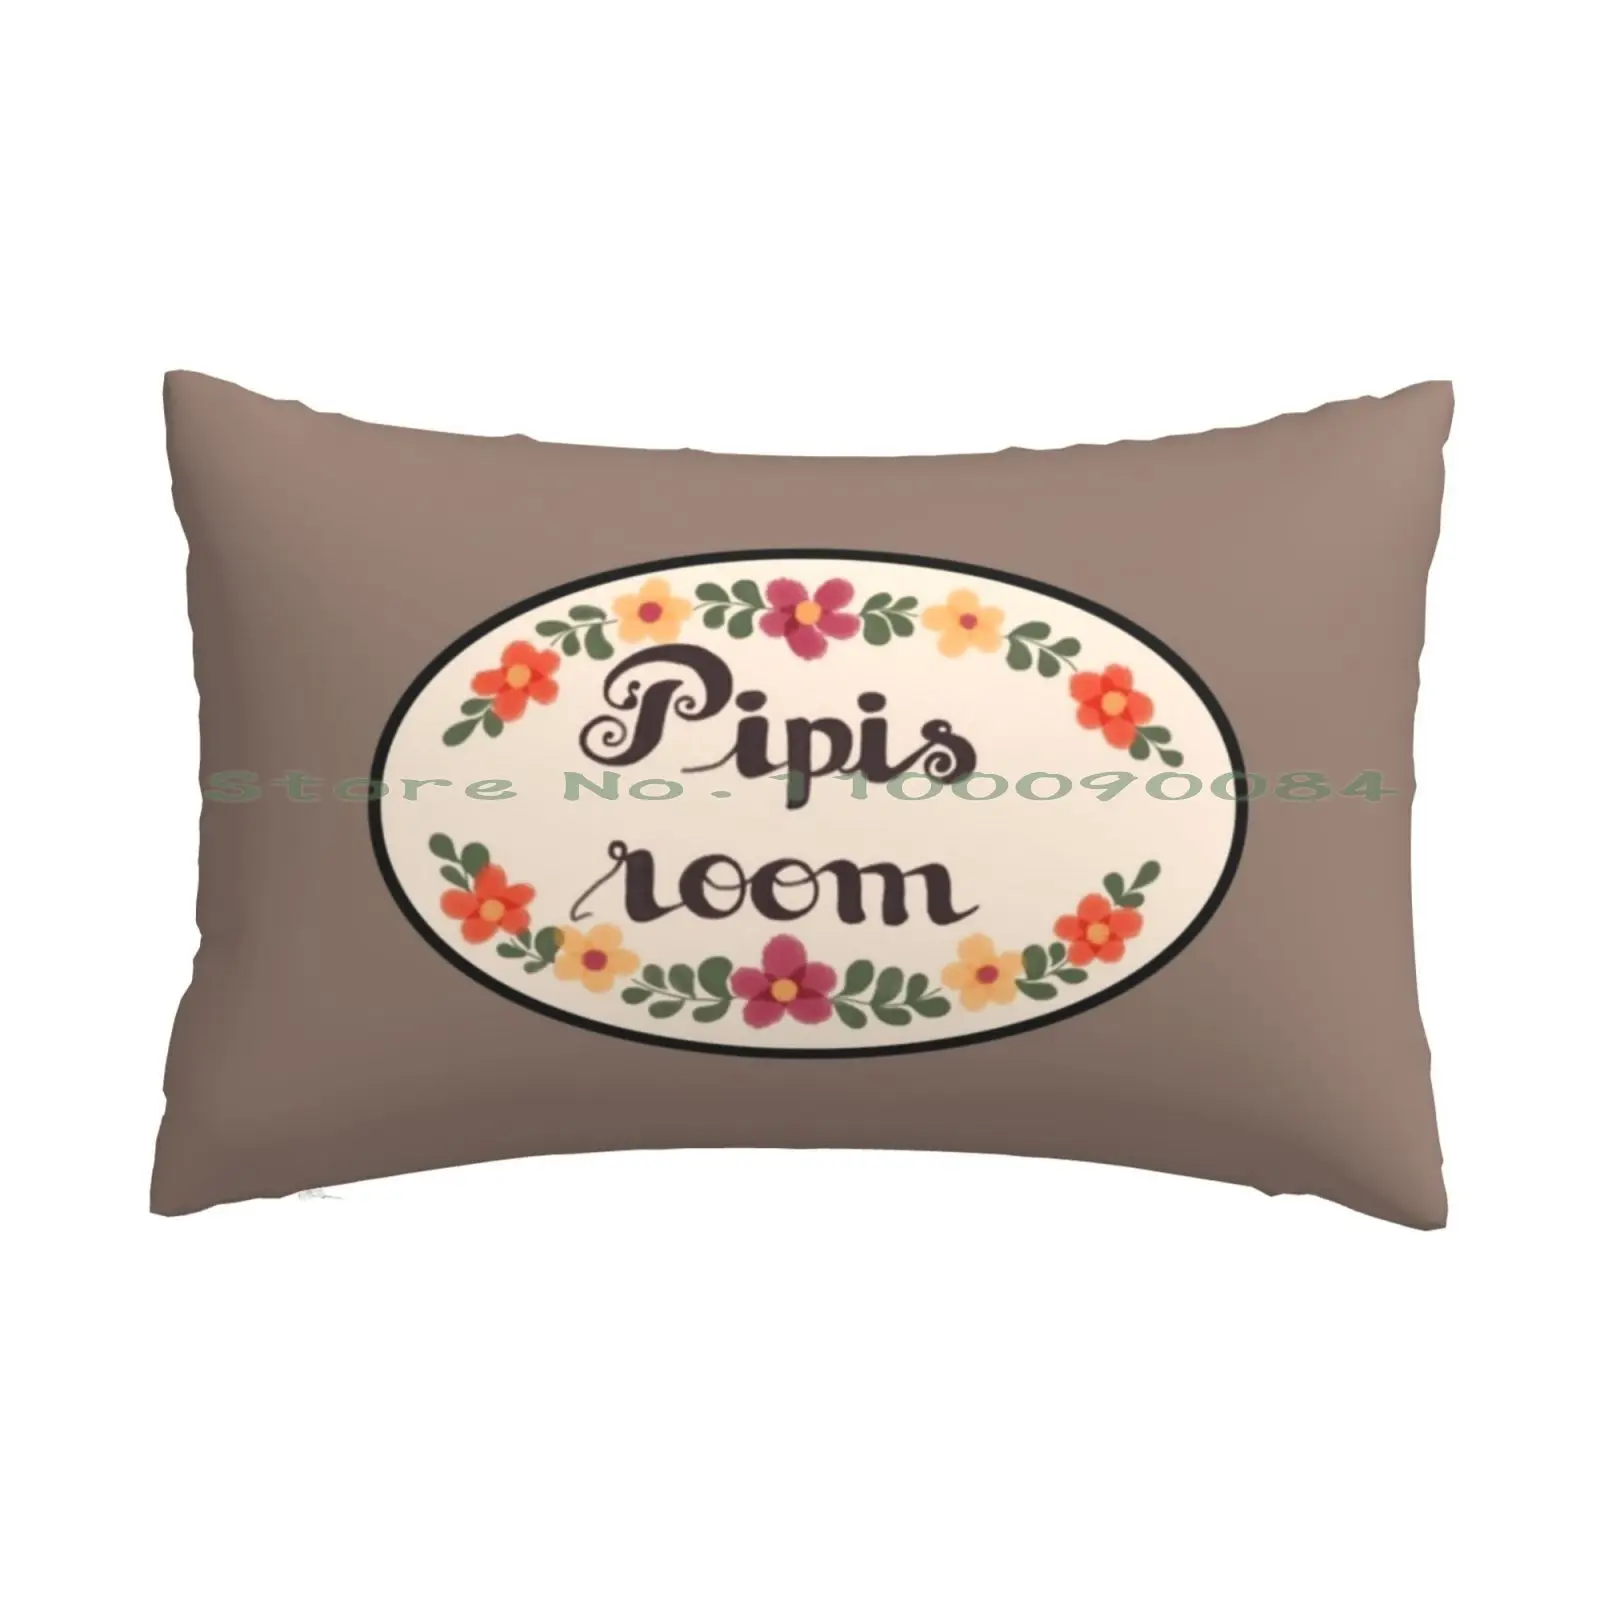 

Pipis Room Design-Polygon Griffin Mcelroy Inspired Pillow Case 20x30 50*75 Sofa Bedroom Pipis Room Polygon Vine Griffin Mcelroy